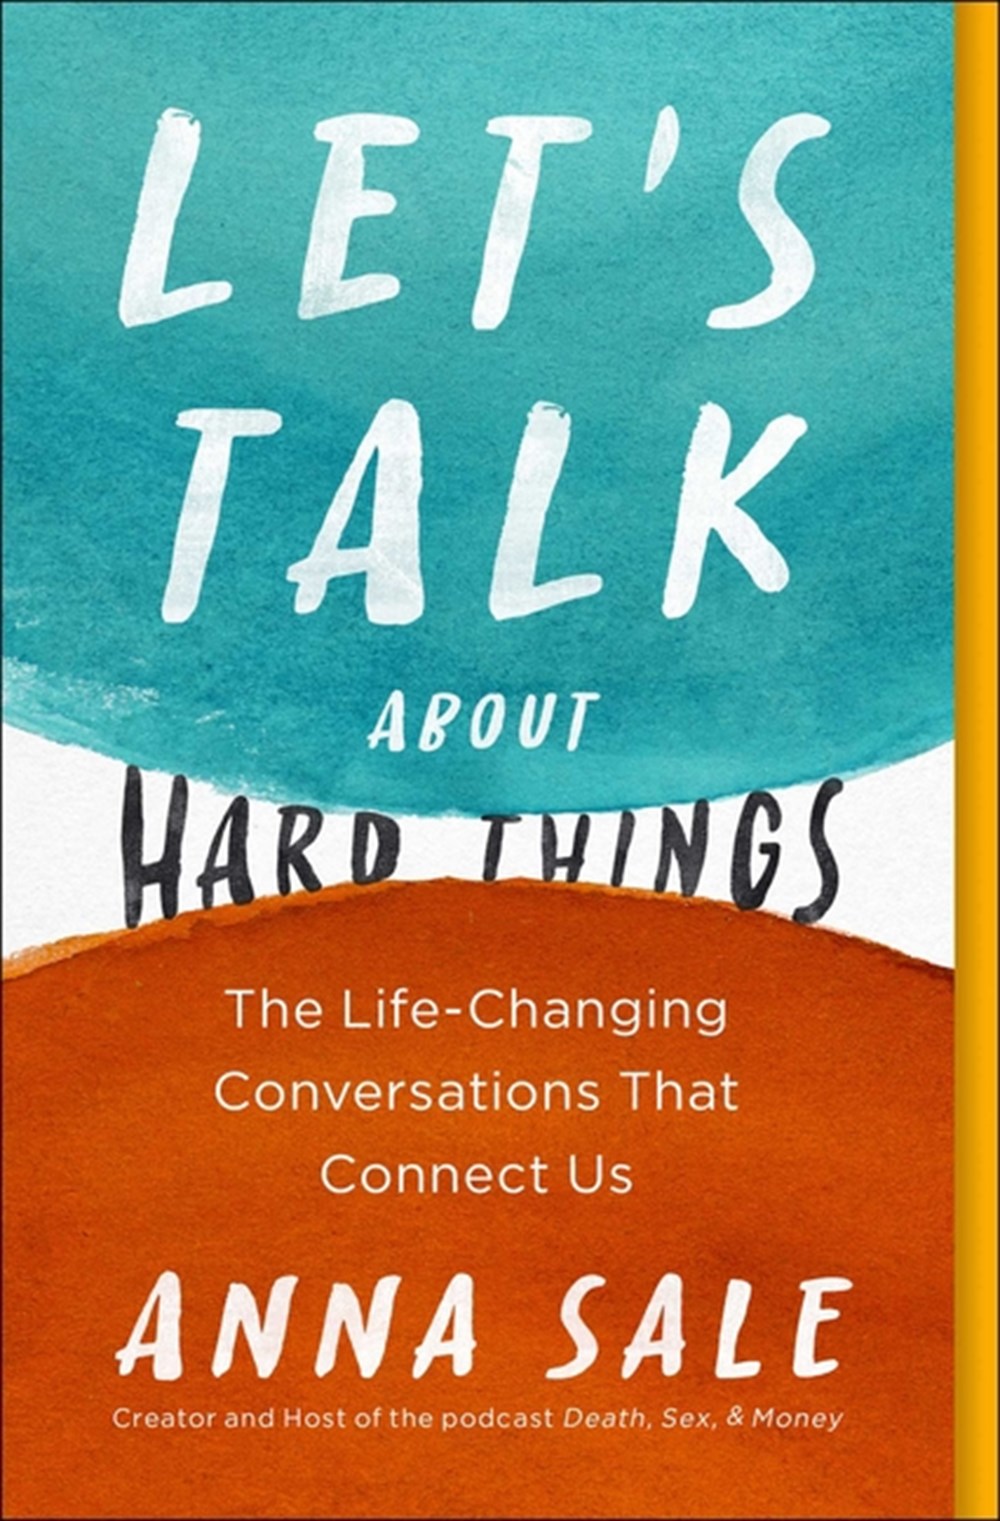 Let's Talk about Hard Things The Life-Changing Conversations That Connect Us